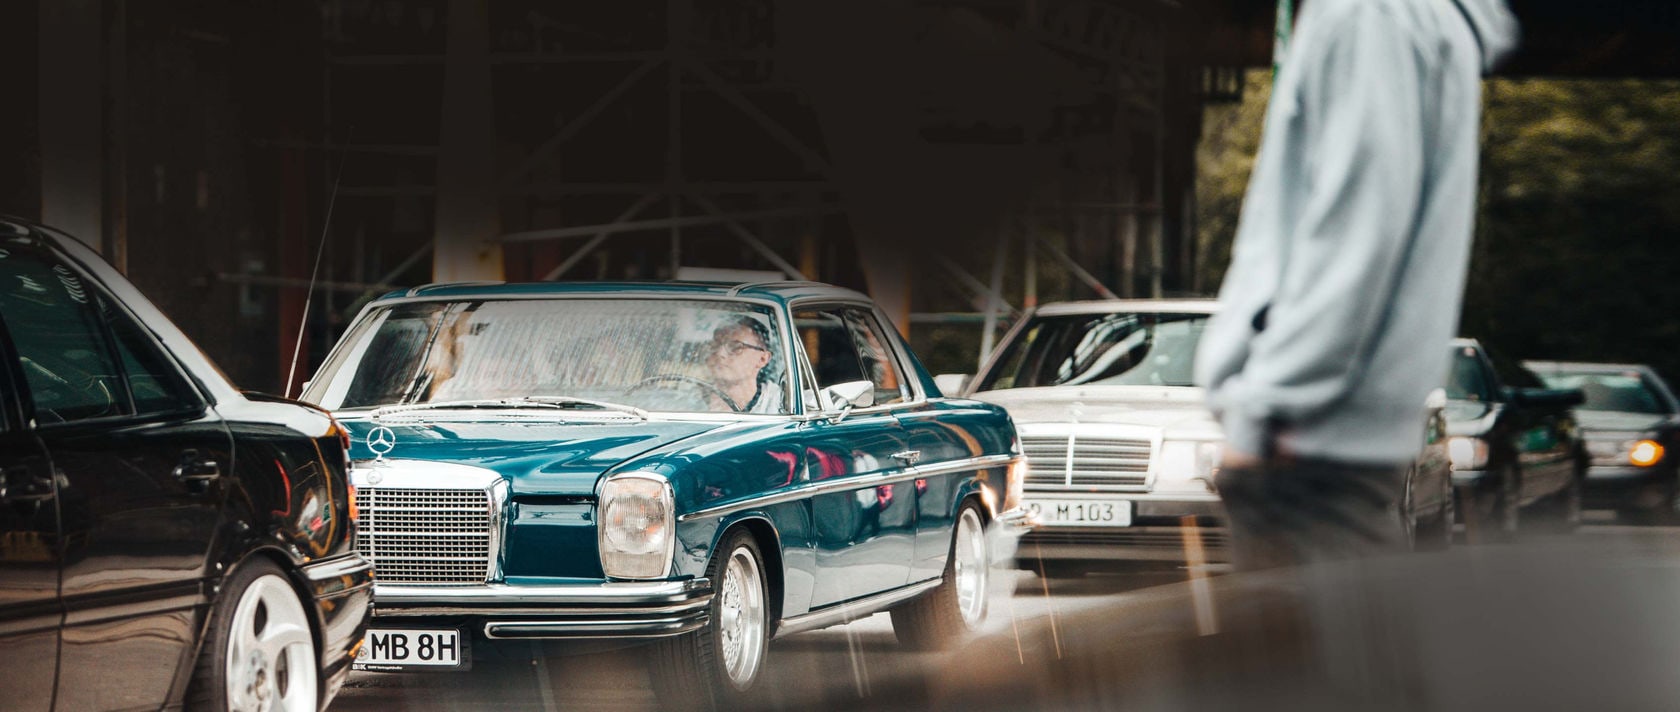 Are you looking for a classic Mercedes-Benz?